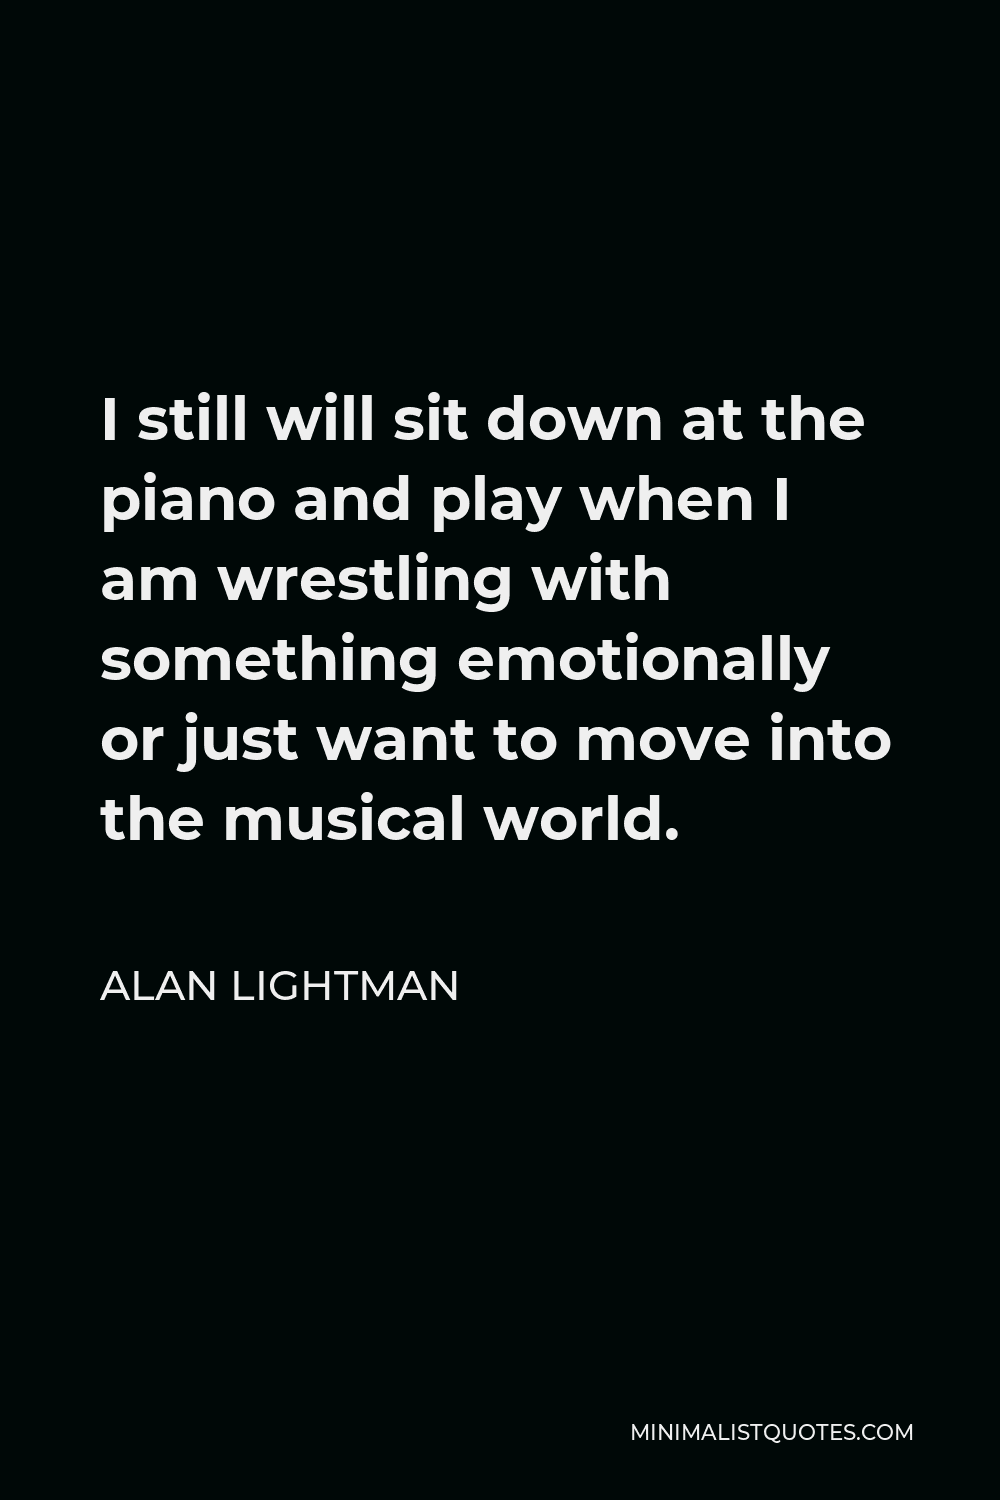 Alan Lightman Quote - I still will sit down at the piano and play when I am wrestling with something emotionally or just want to move into the musical world.